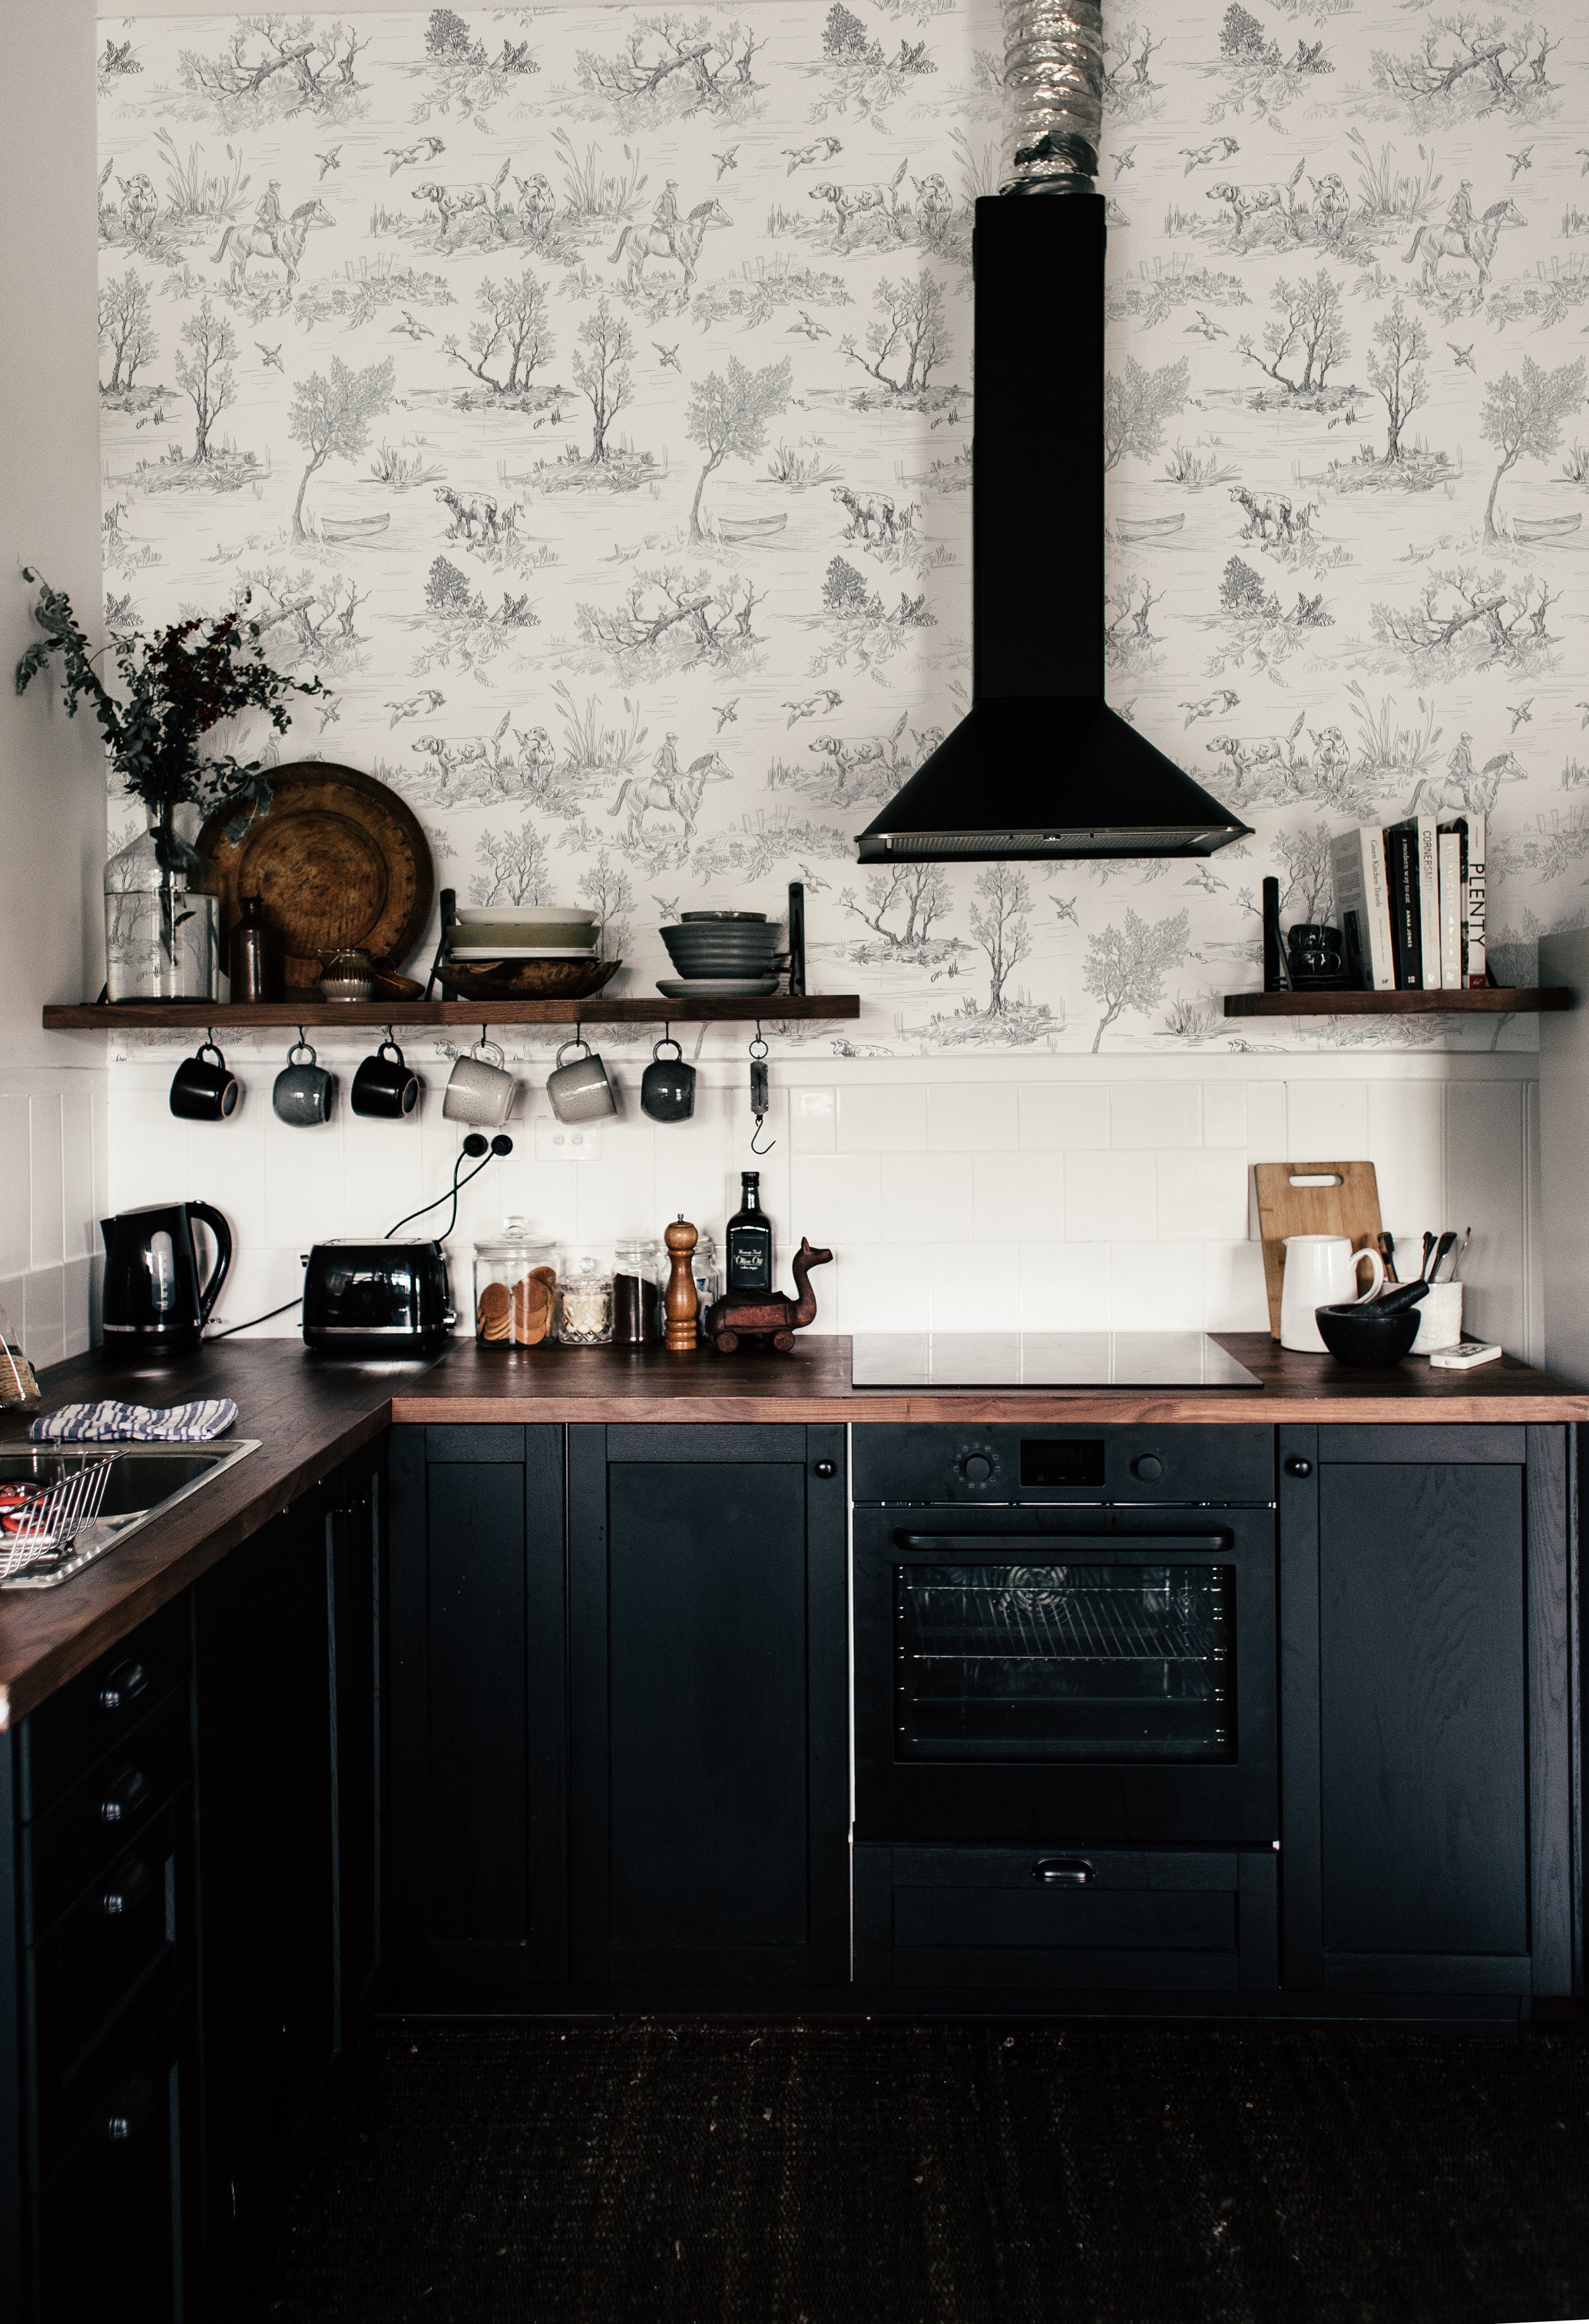 a kitchen scene with "Outdoor Friend Sketch Wallpaper." The wallpaper features a monochromatic sketch of a countryside scene with trees, dogs, and horses, creating a rustic and charming ambiance. The wall is complemented by dark cabinetry, a white tiled backsplash, wooden countertops, and a selection of kitchen utensils, contributing to the warm, traditional feel of the space.